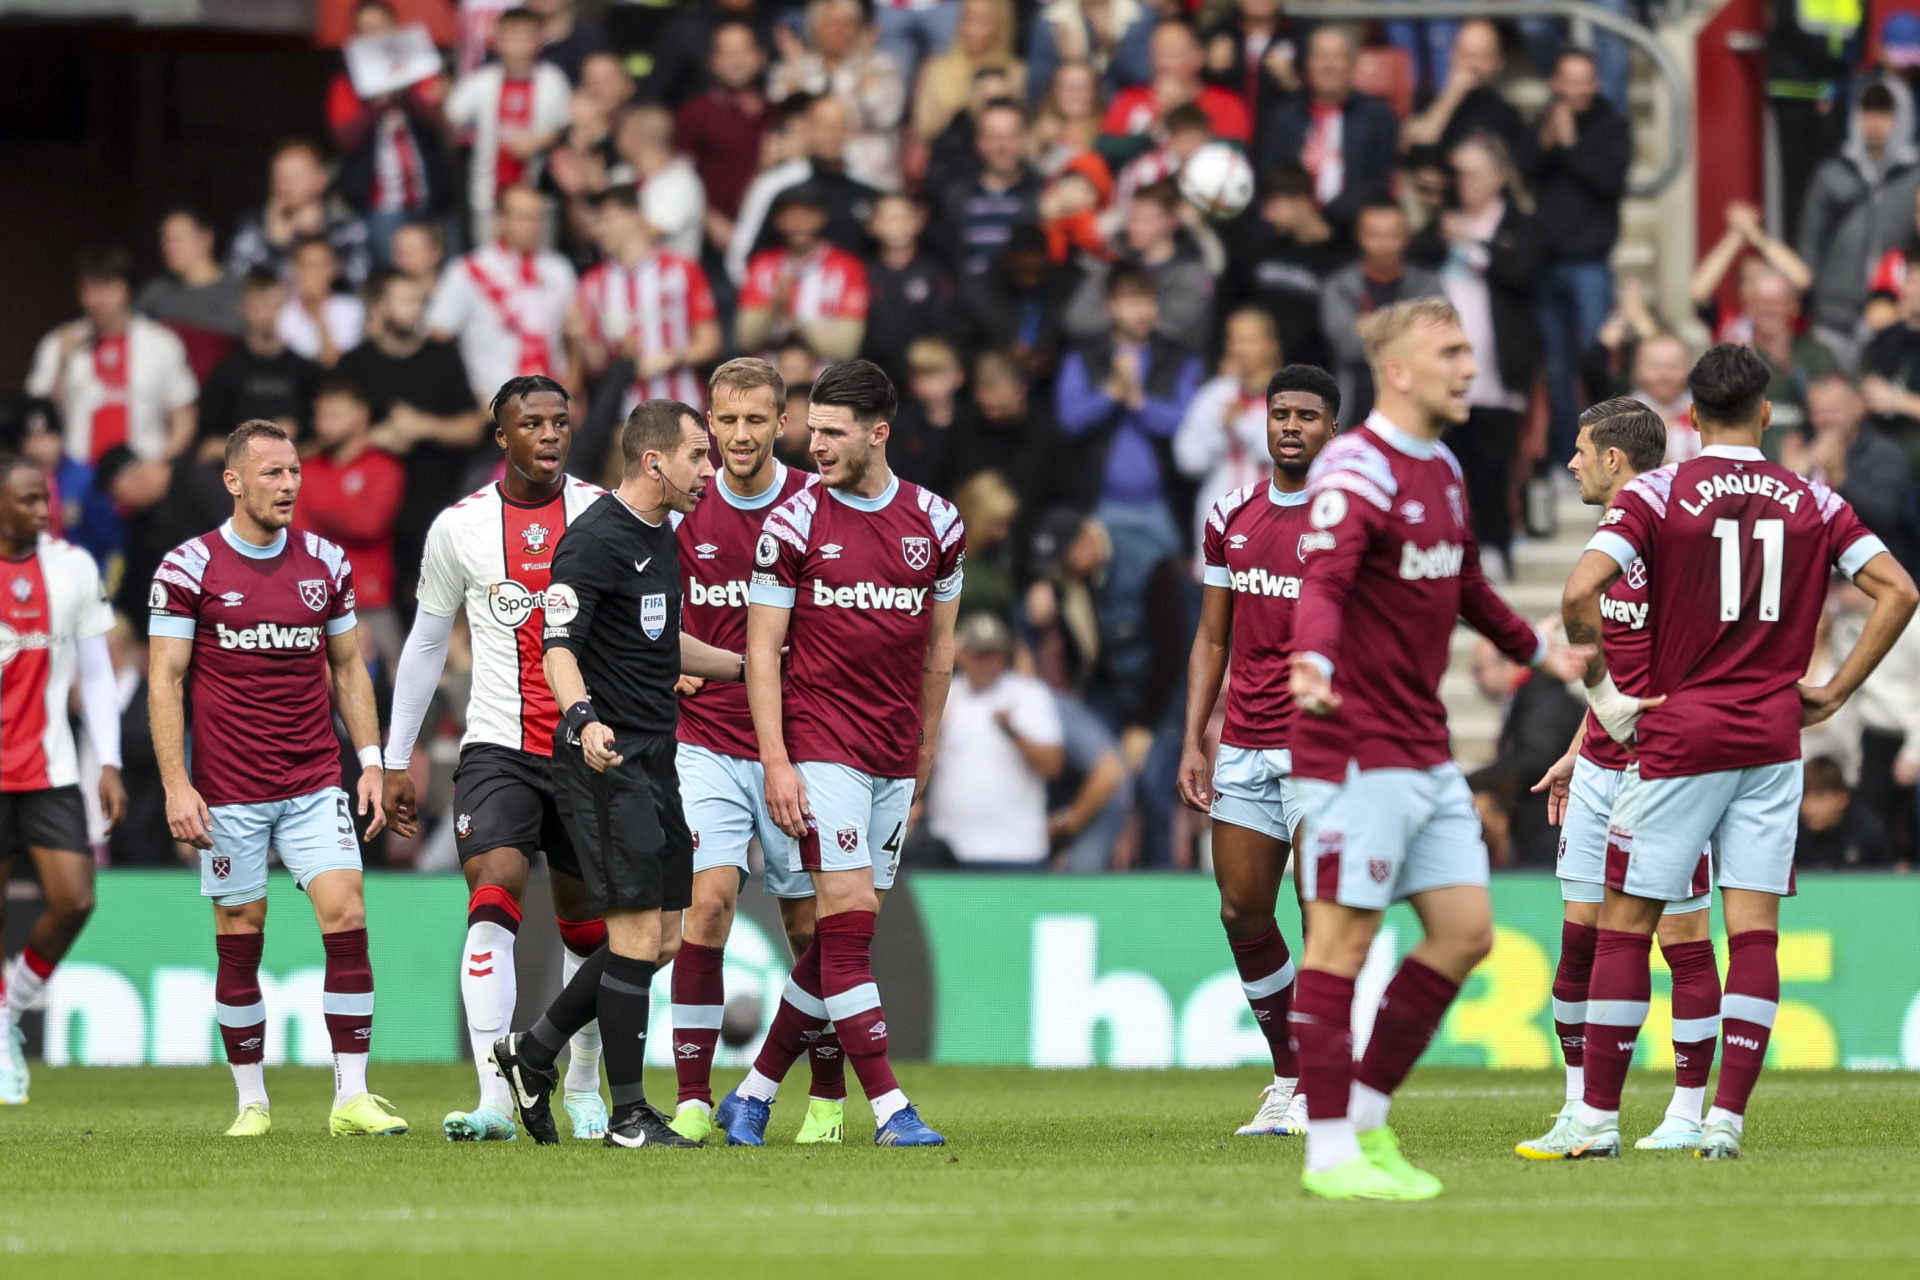 West Ham fans will be fuming after official announcement ahead of Newcastle clash